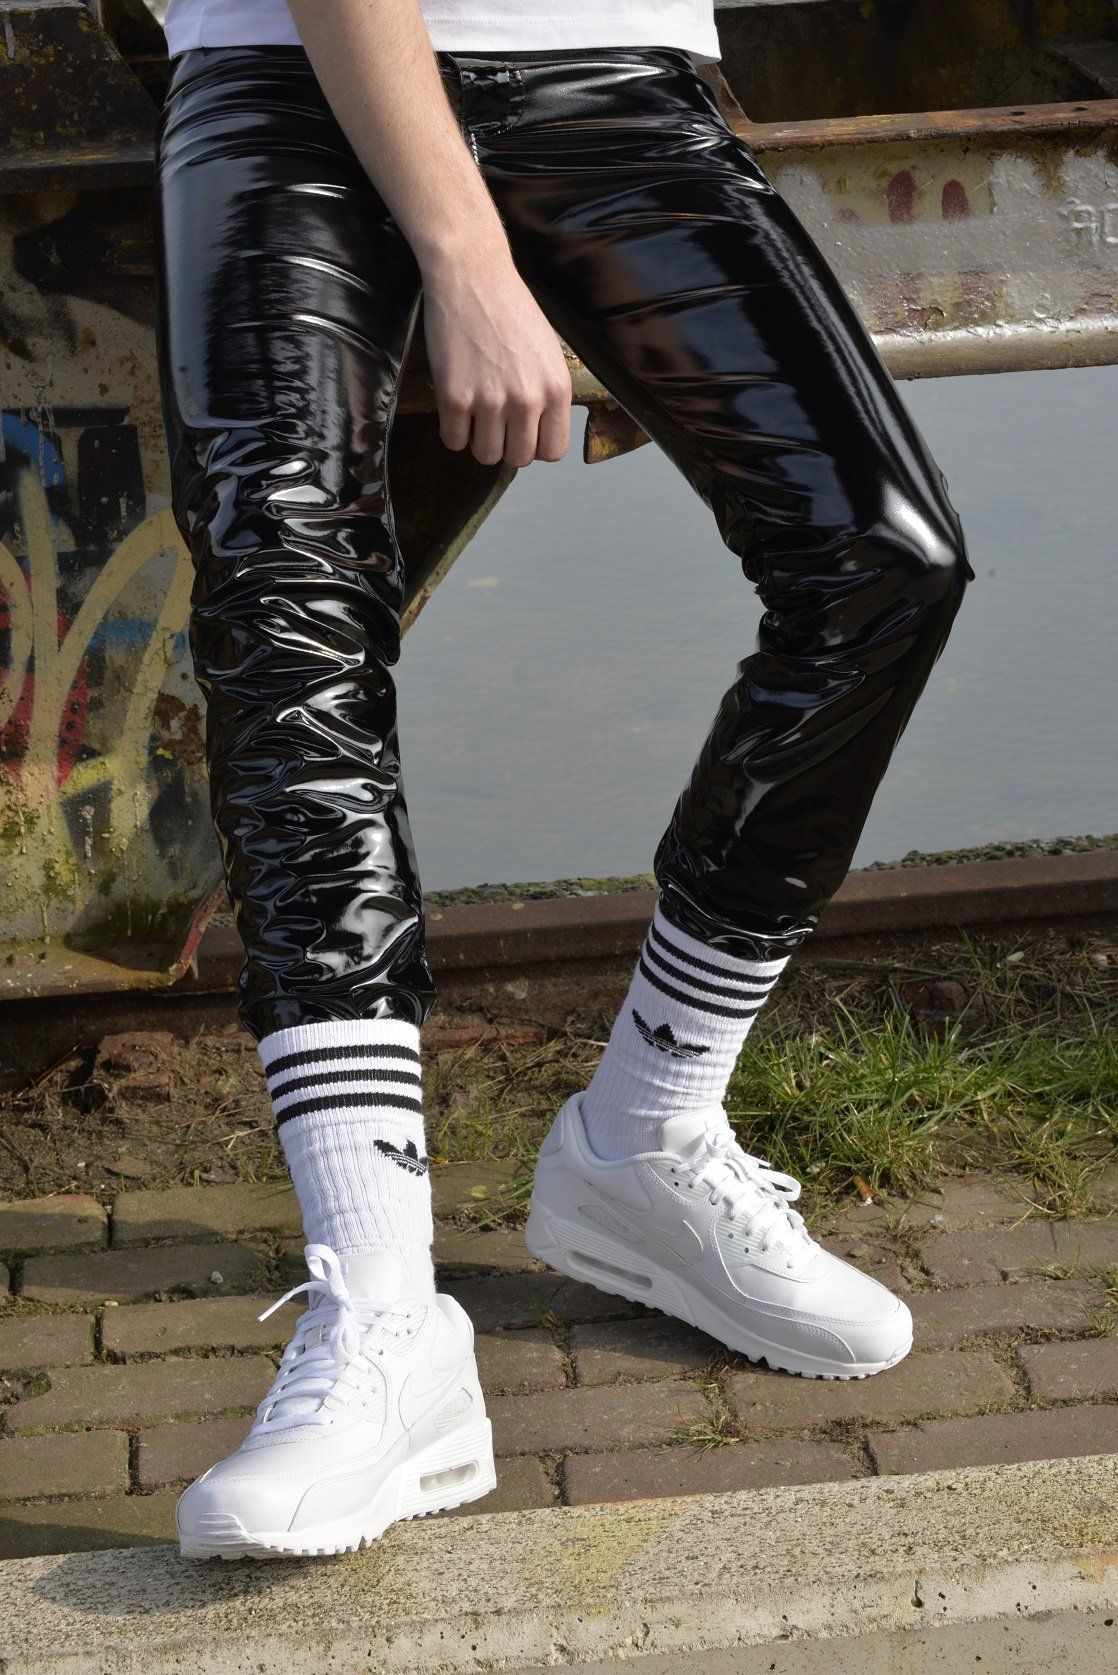 PVC Leggings, Leggins, Trousers, Pants, Very Glossy, Shiny, and Stretchy,  Handmade, New -  Canada